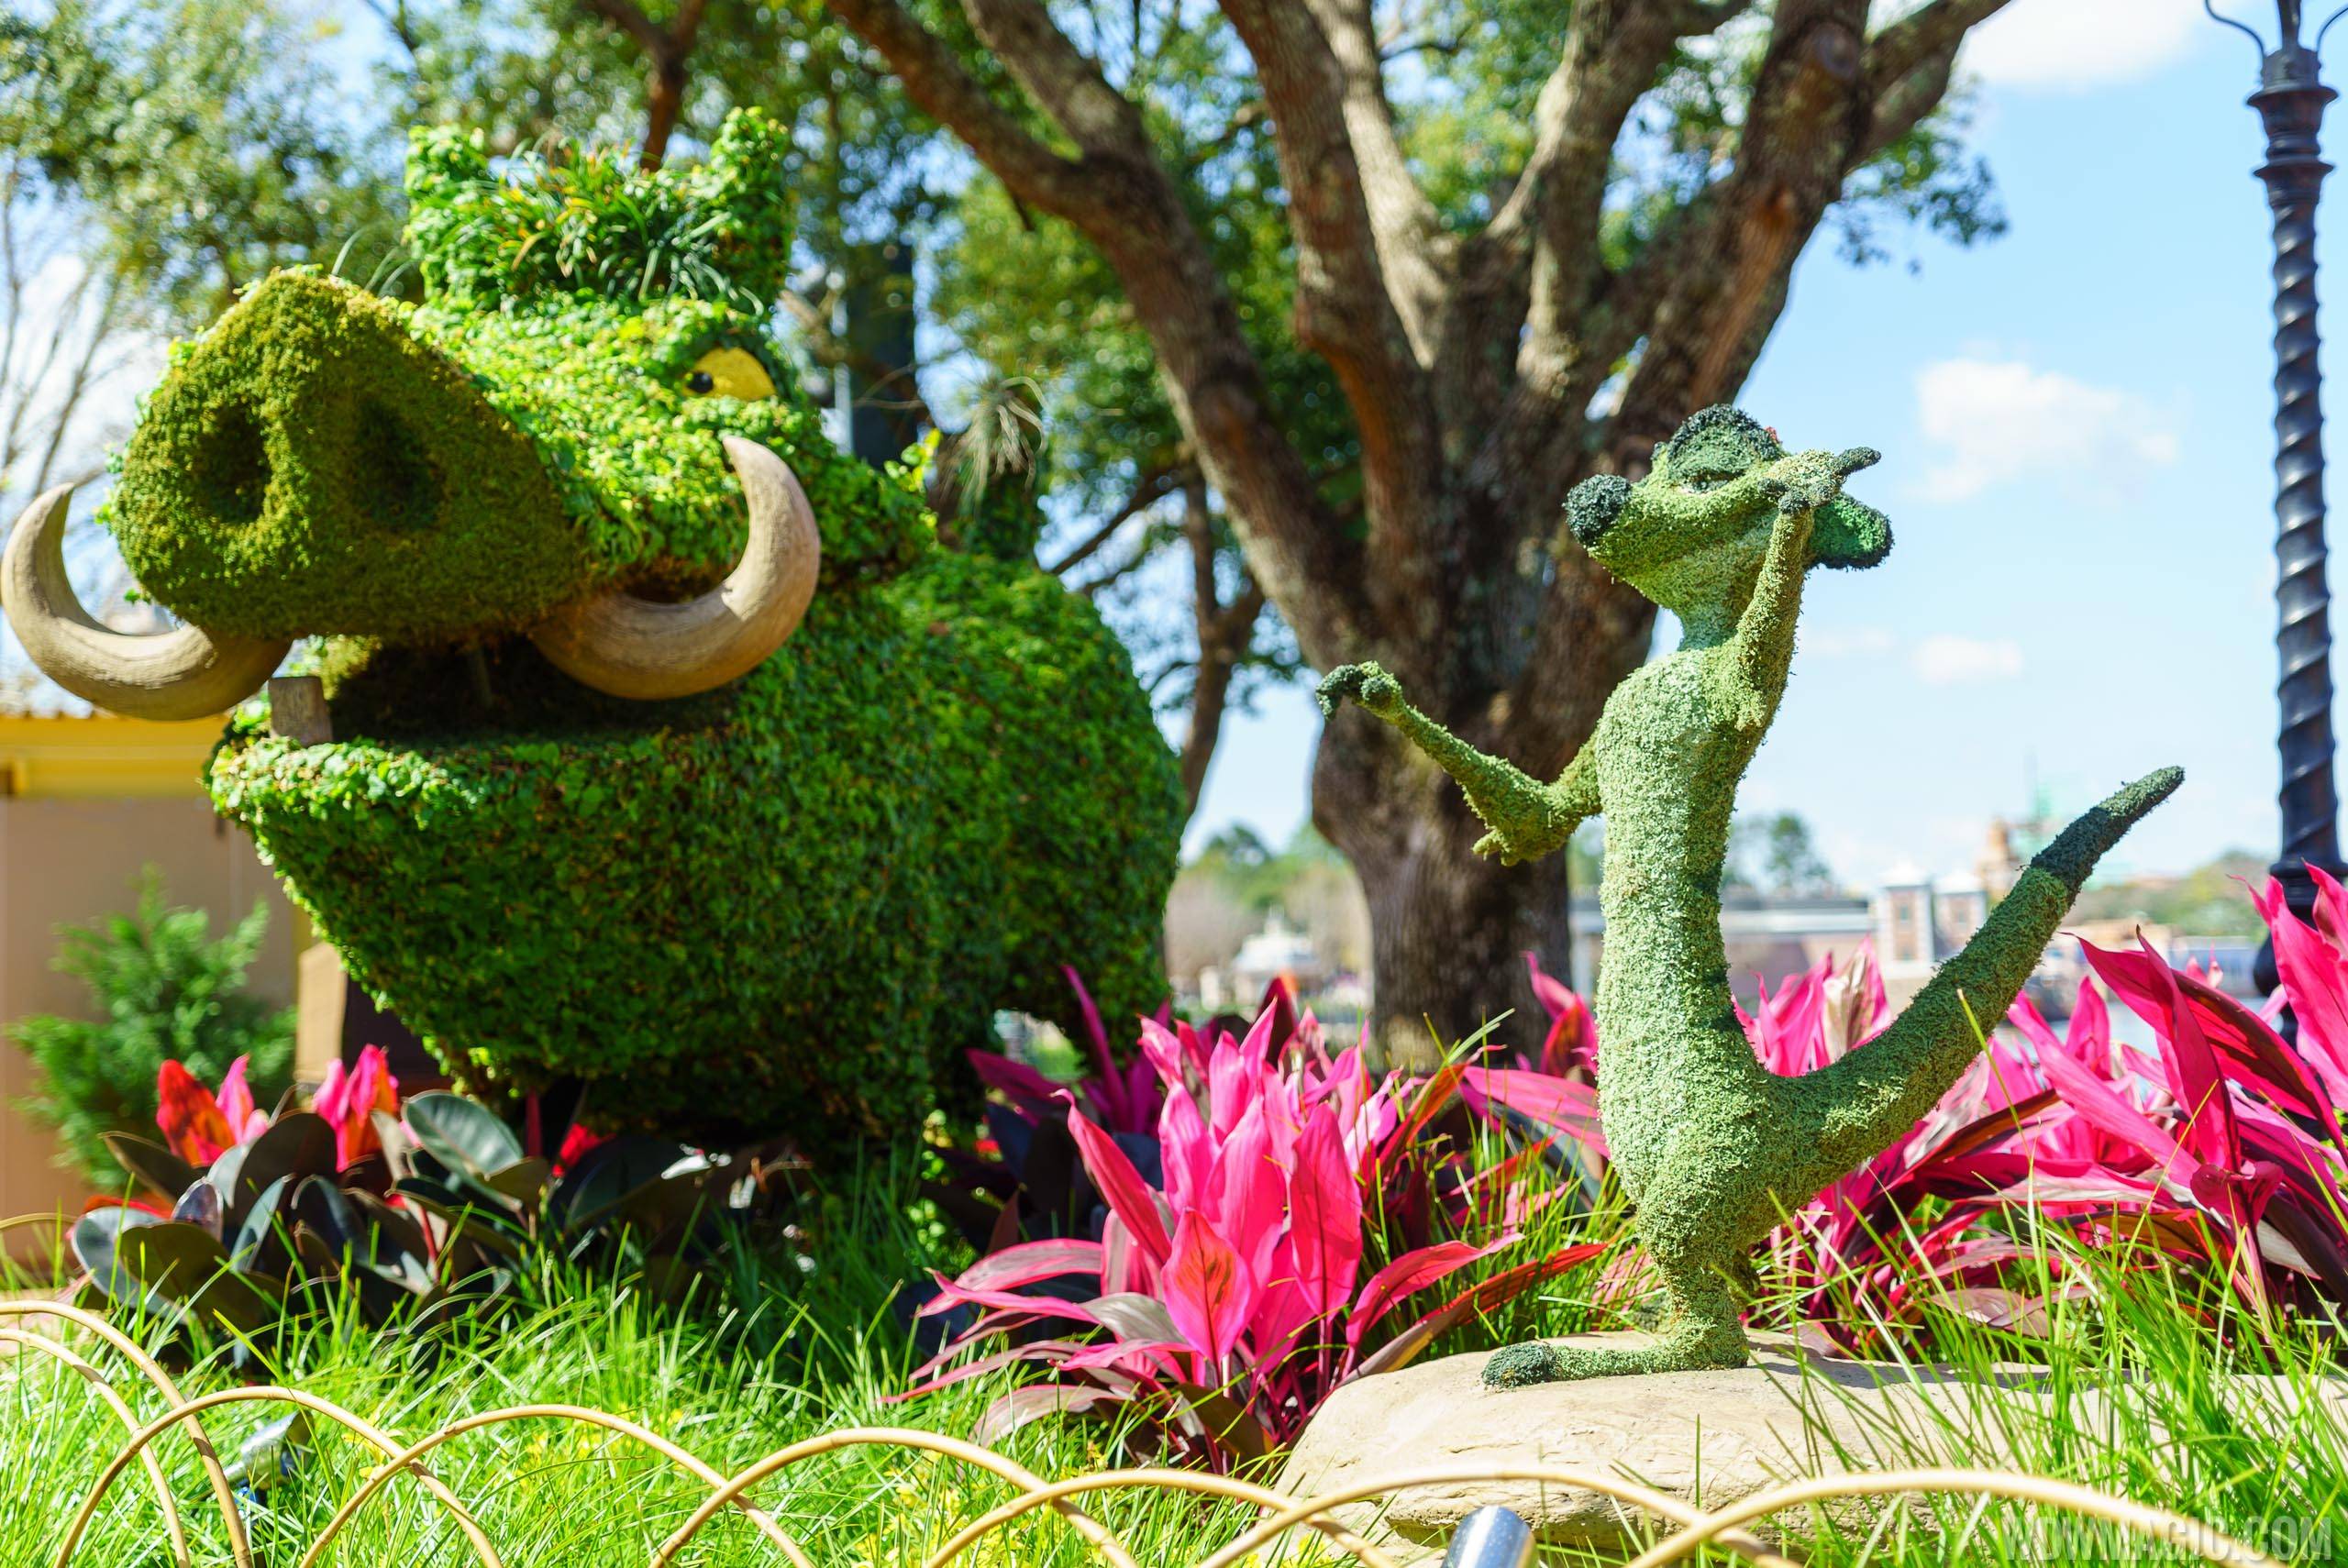 2016 Epcot International Flower and Garden Festival - Timon and Pumba topiaries